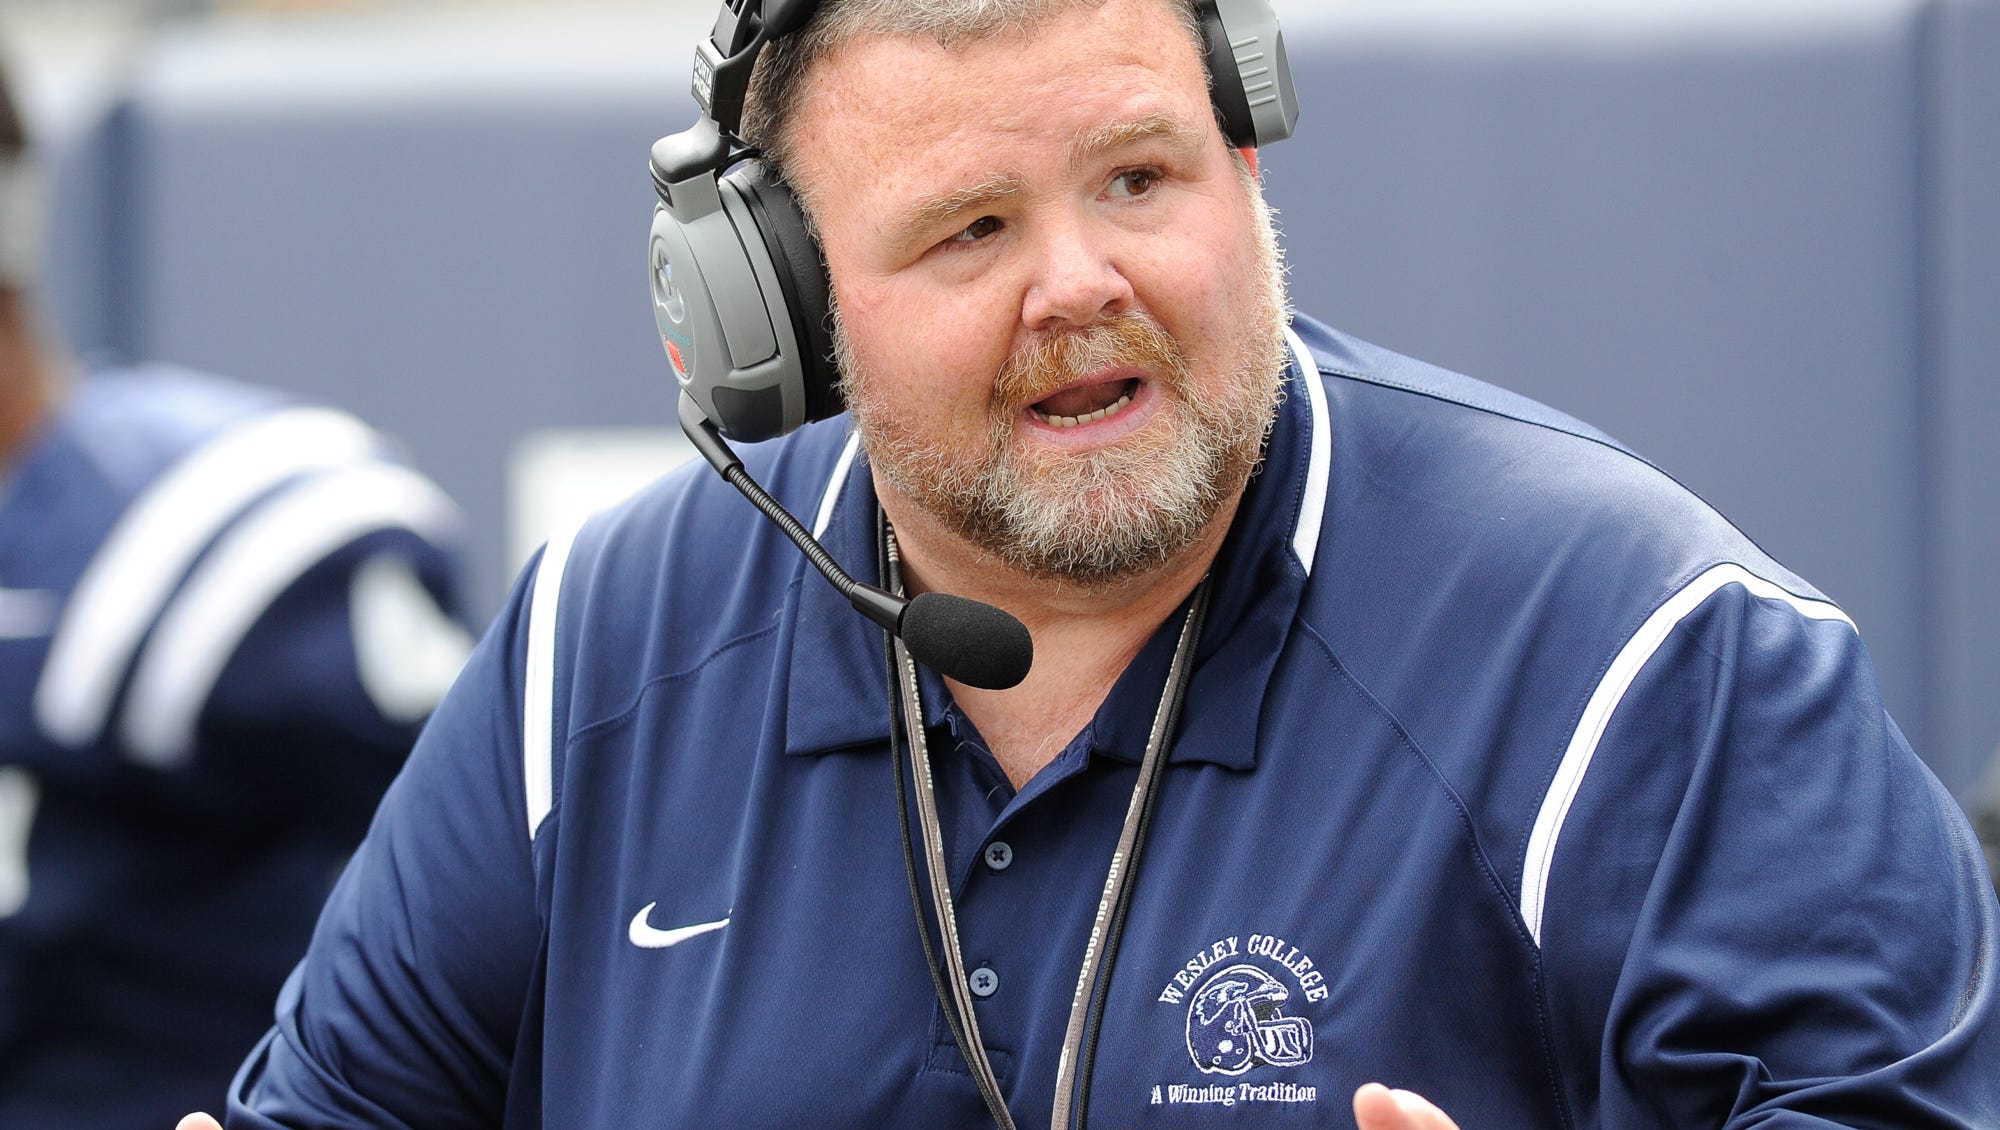 Wesley College head football coach Mike Drass dies